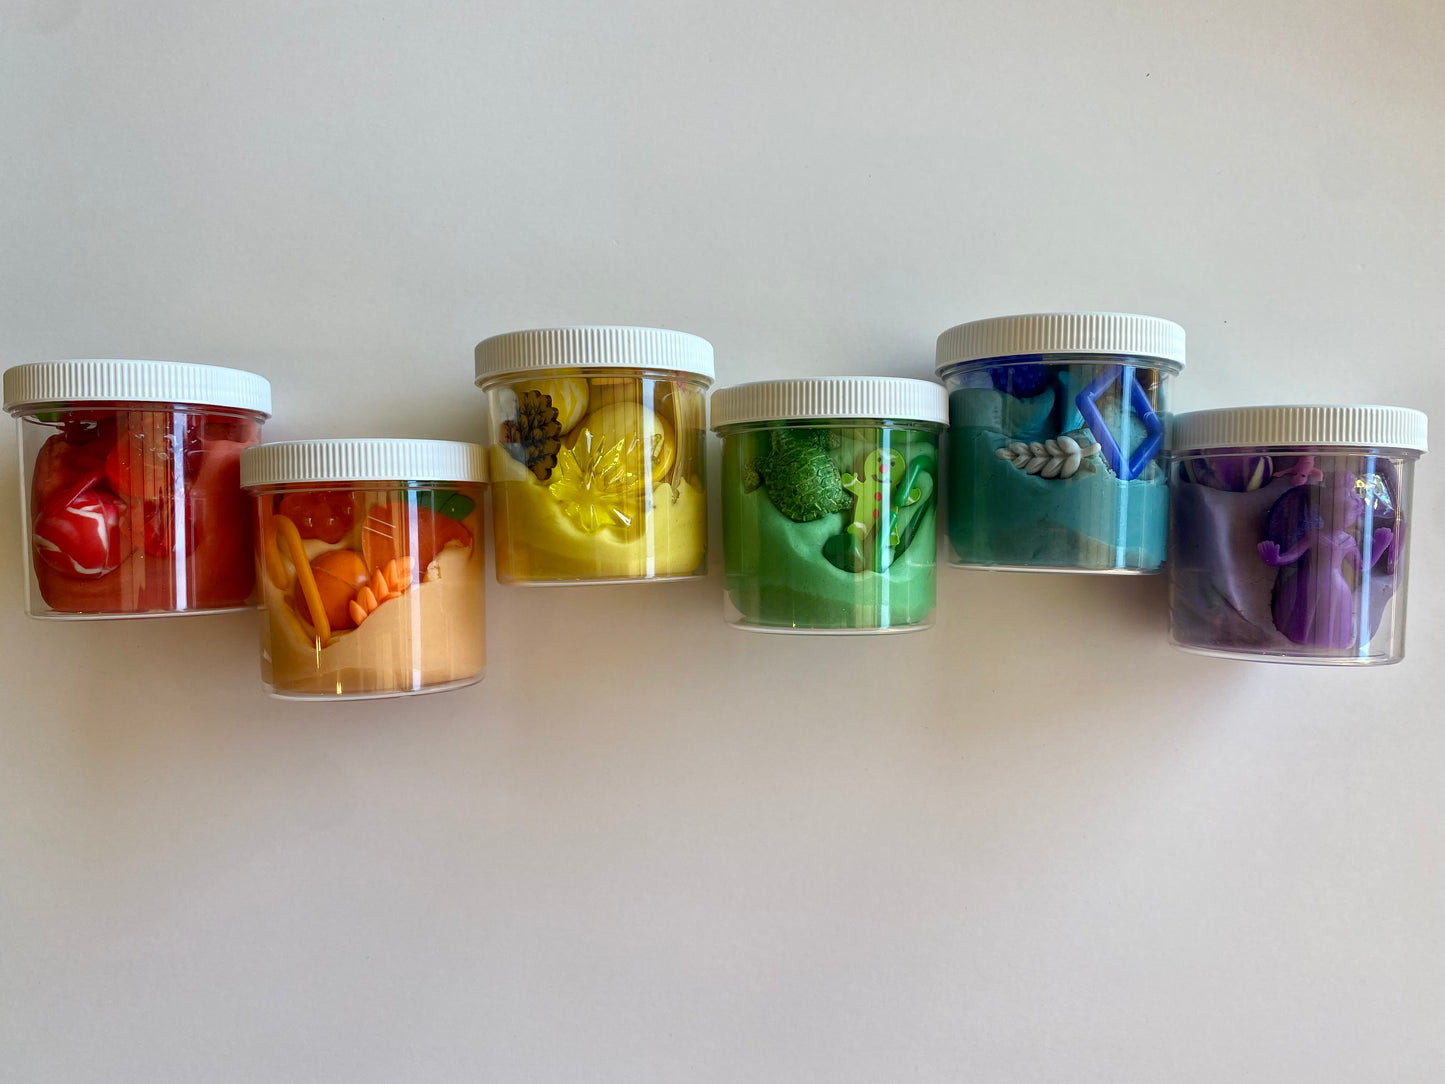 6 Pack Colors Play Dough Jars (Age 3 yr+ recommended)